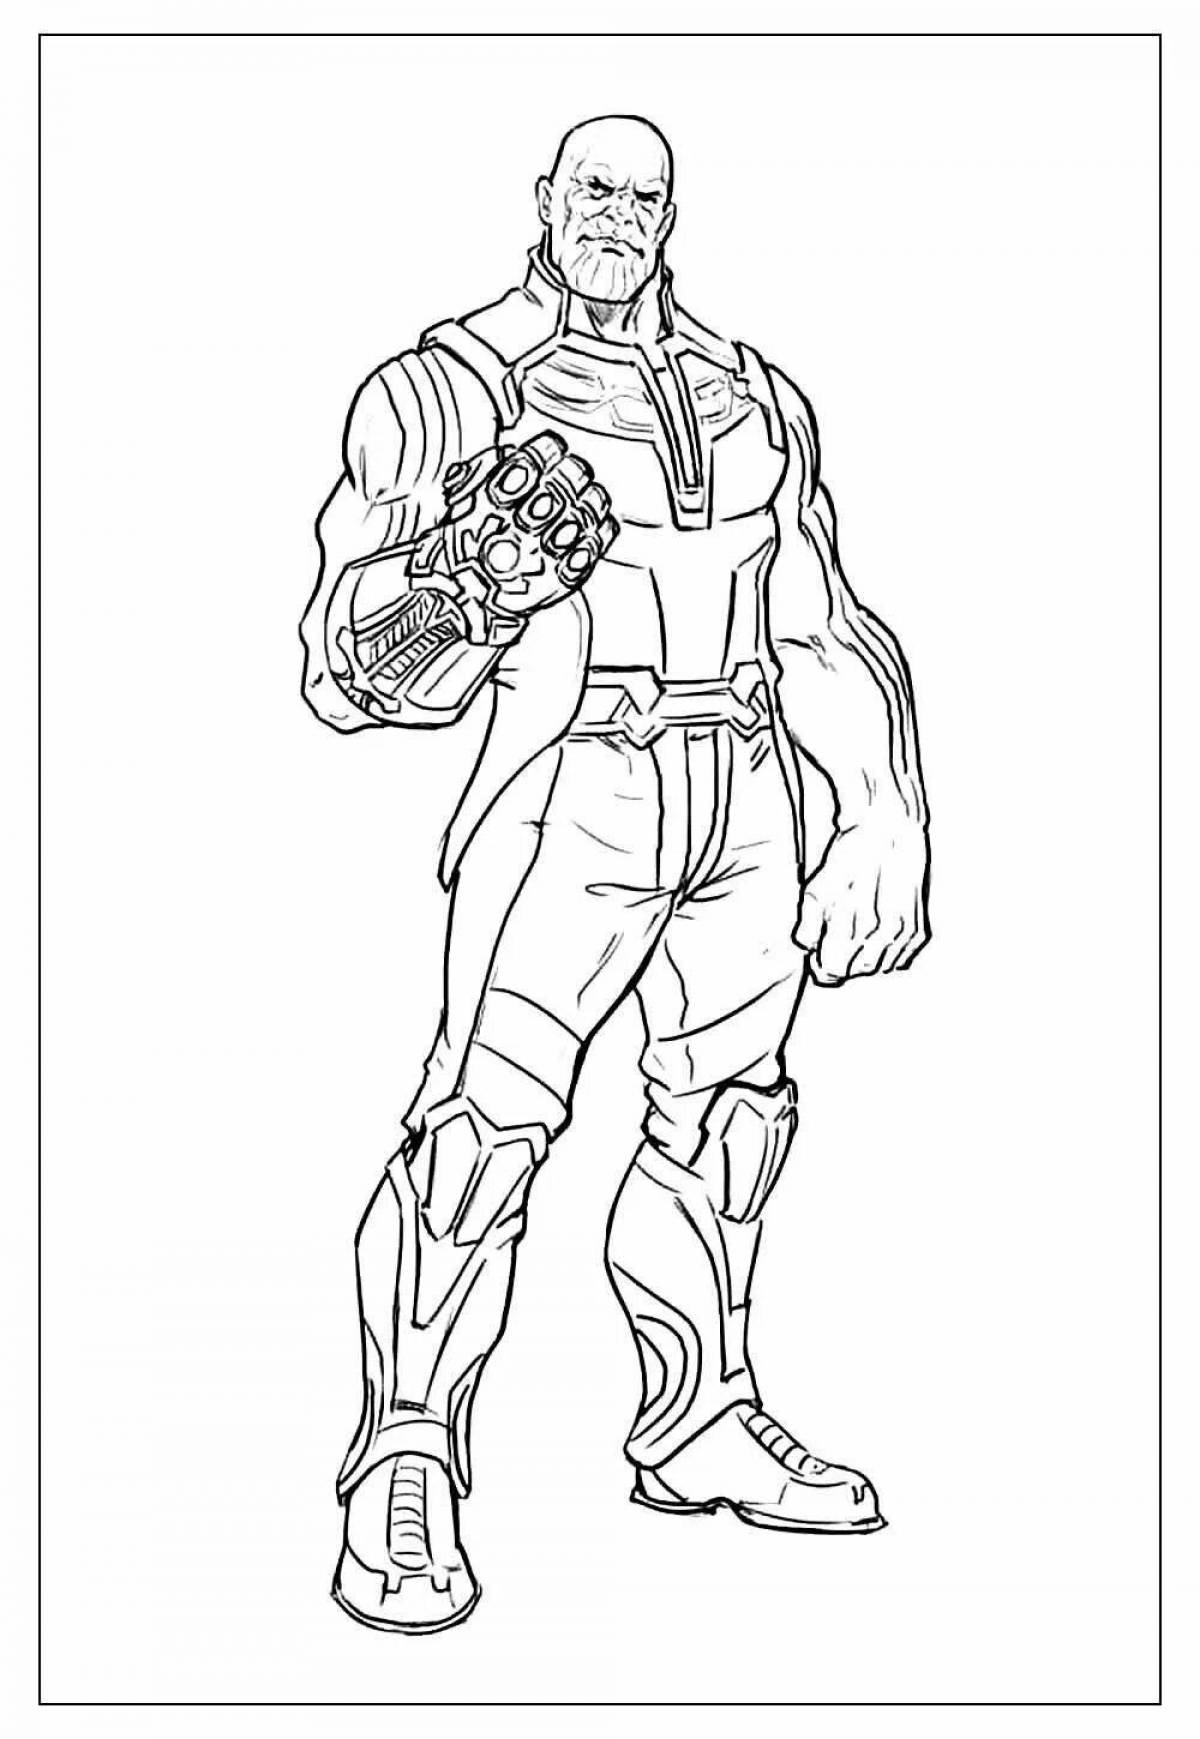 Dazzling thanos coloring page